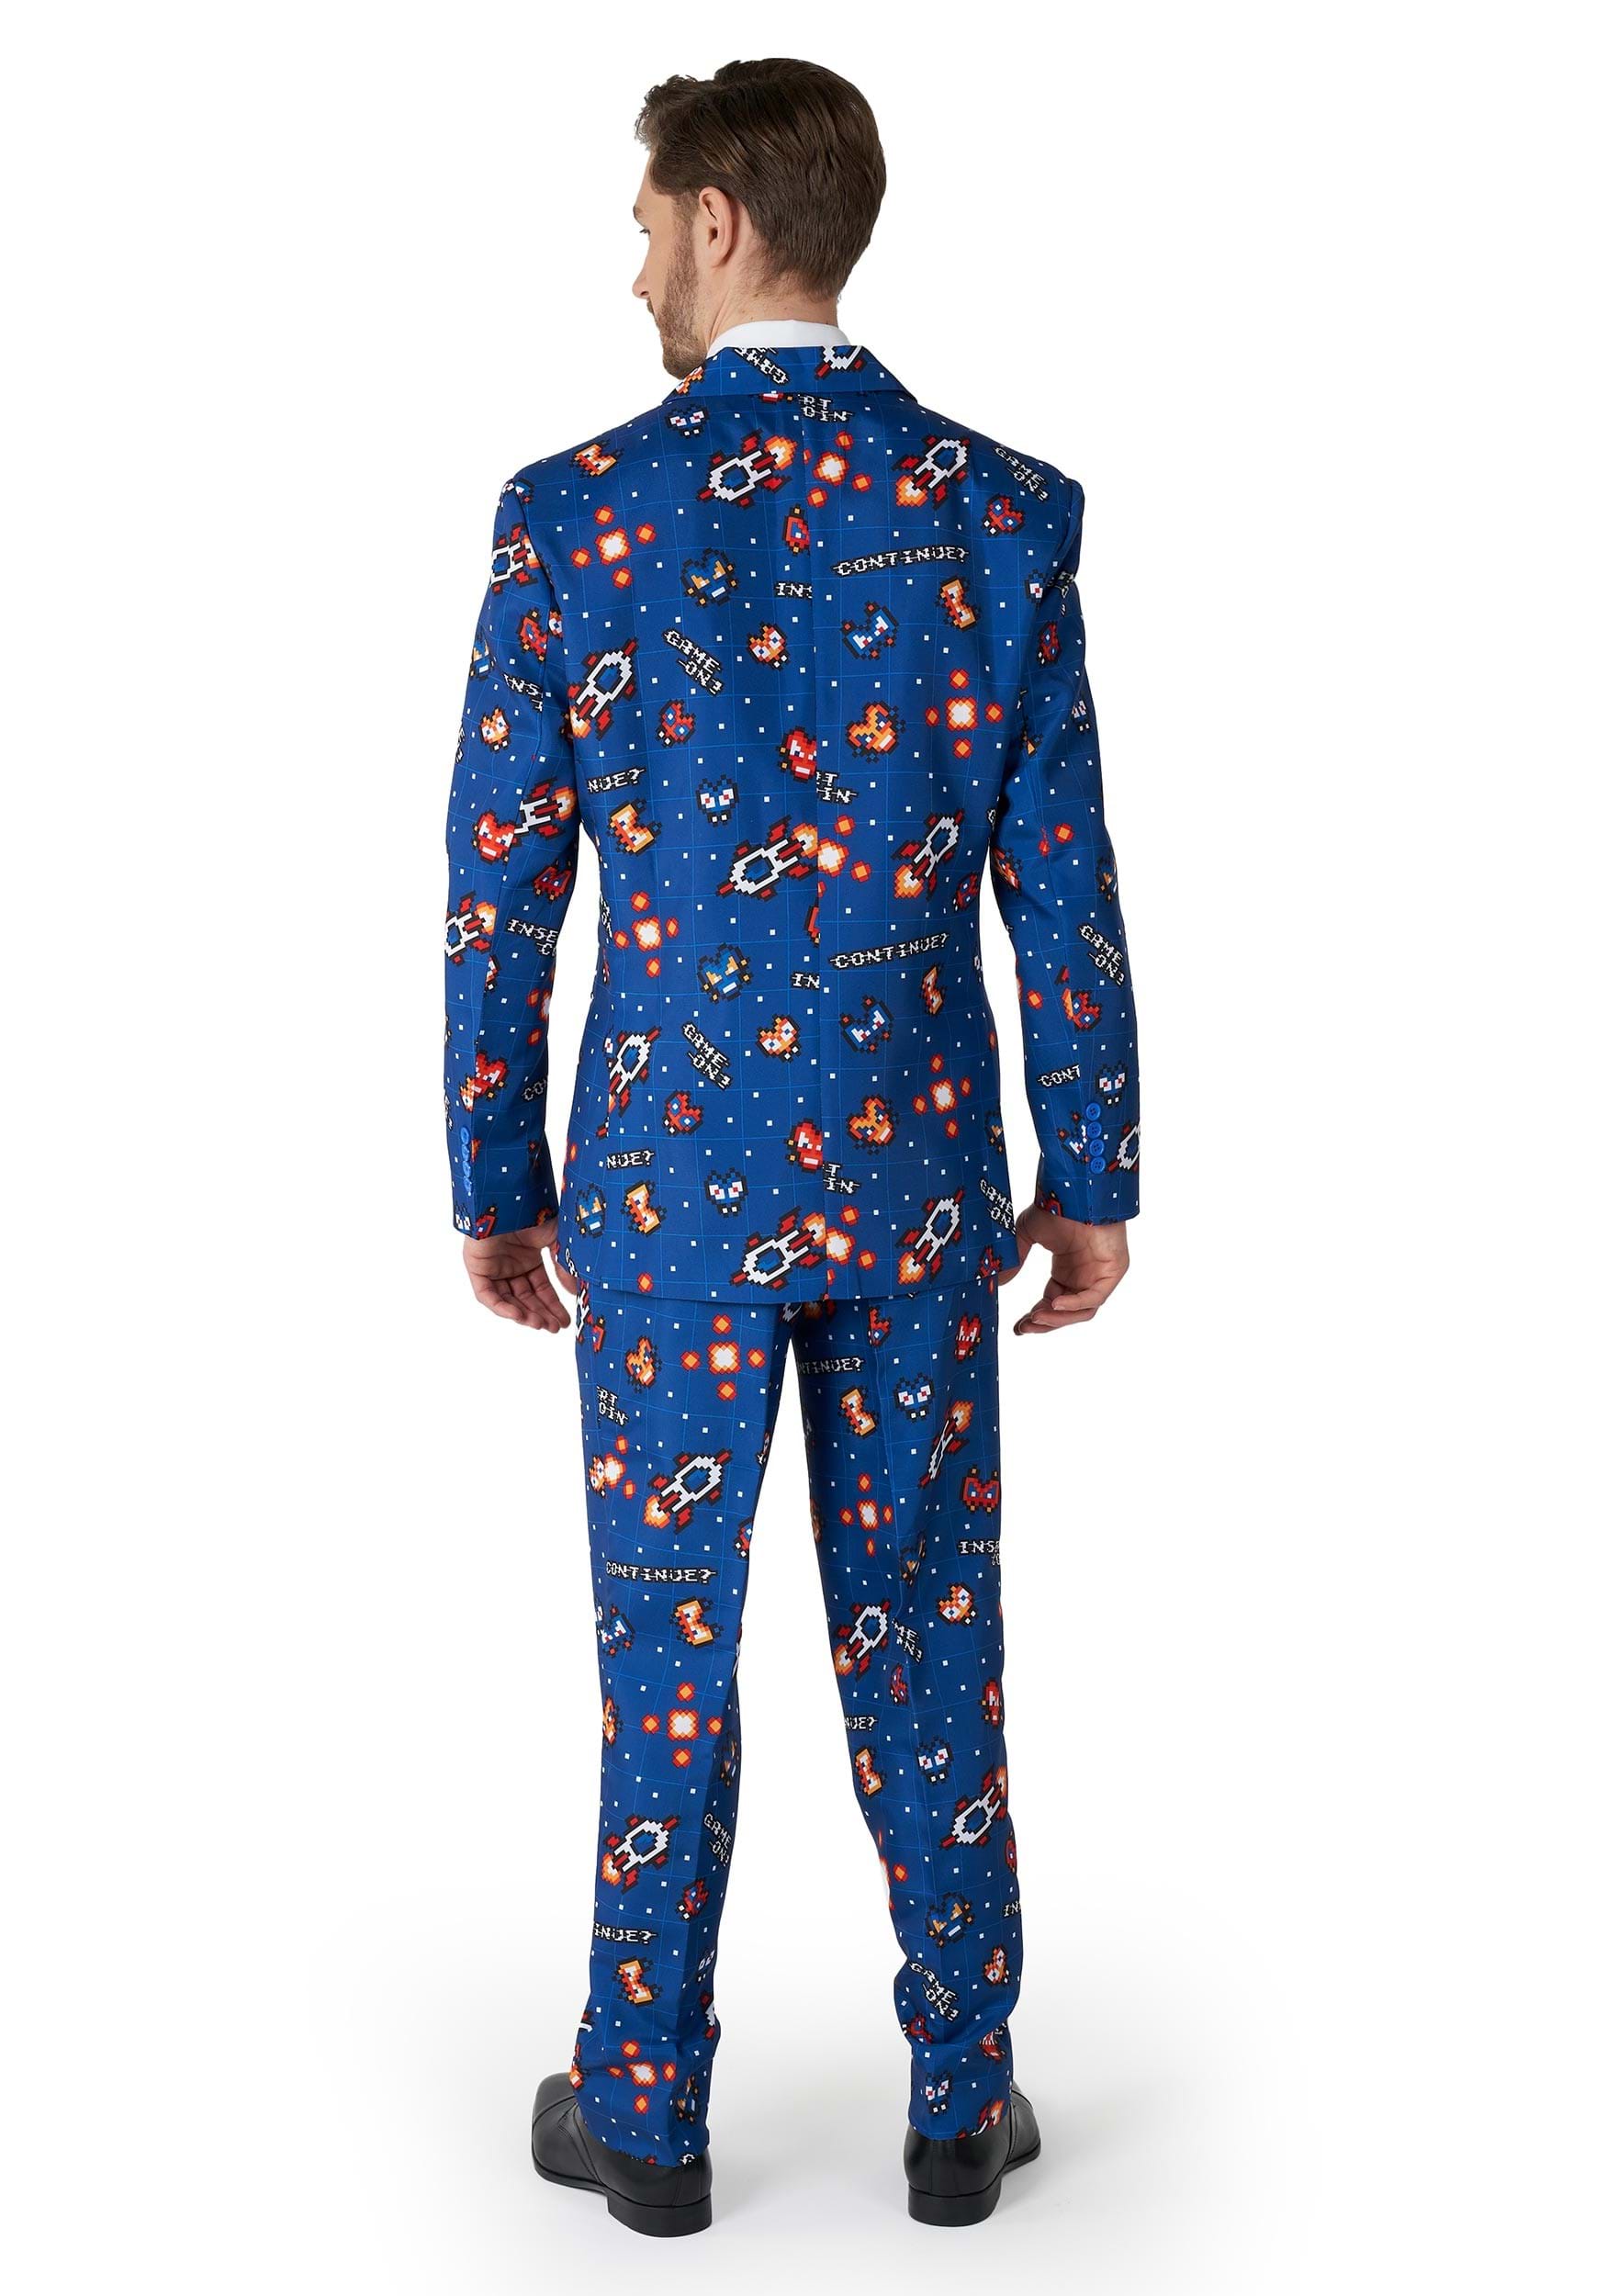 Suitmeister Mens Gamer Navy Suit